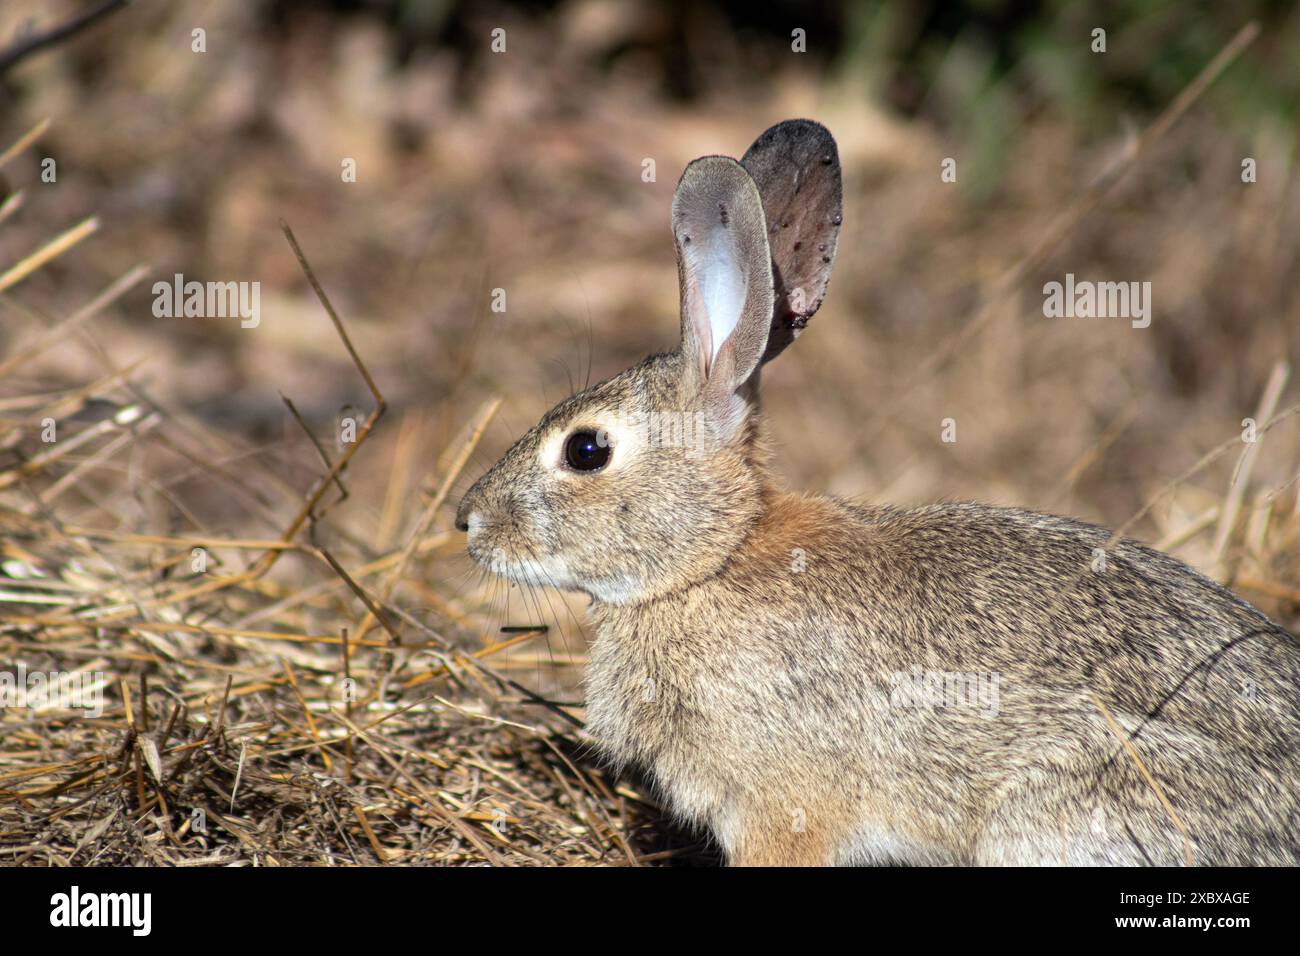 A desert cottontail rabbit, Sylvilagus audubonii, also known as Audubon's cottontail, in the hills of Griffith Park, Los Angeles, California, USA Stock Photo